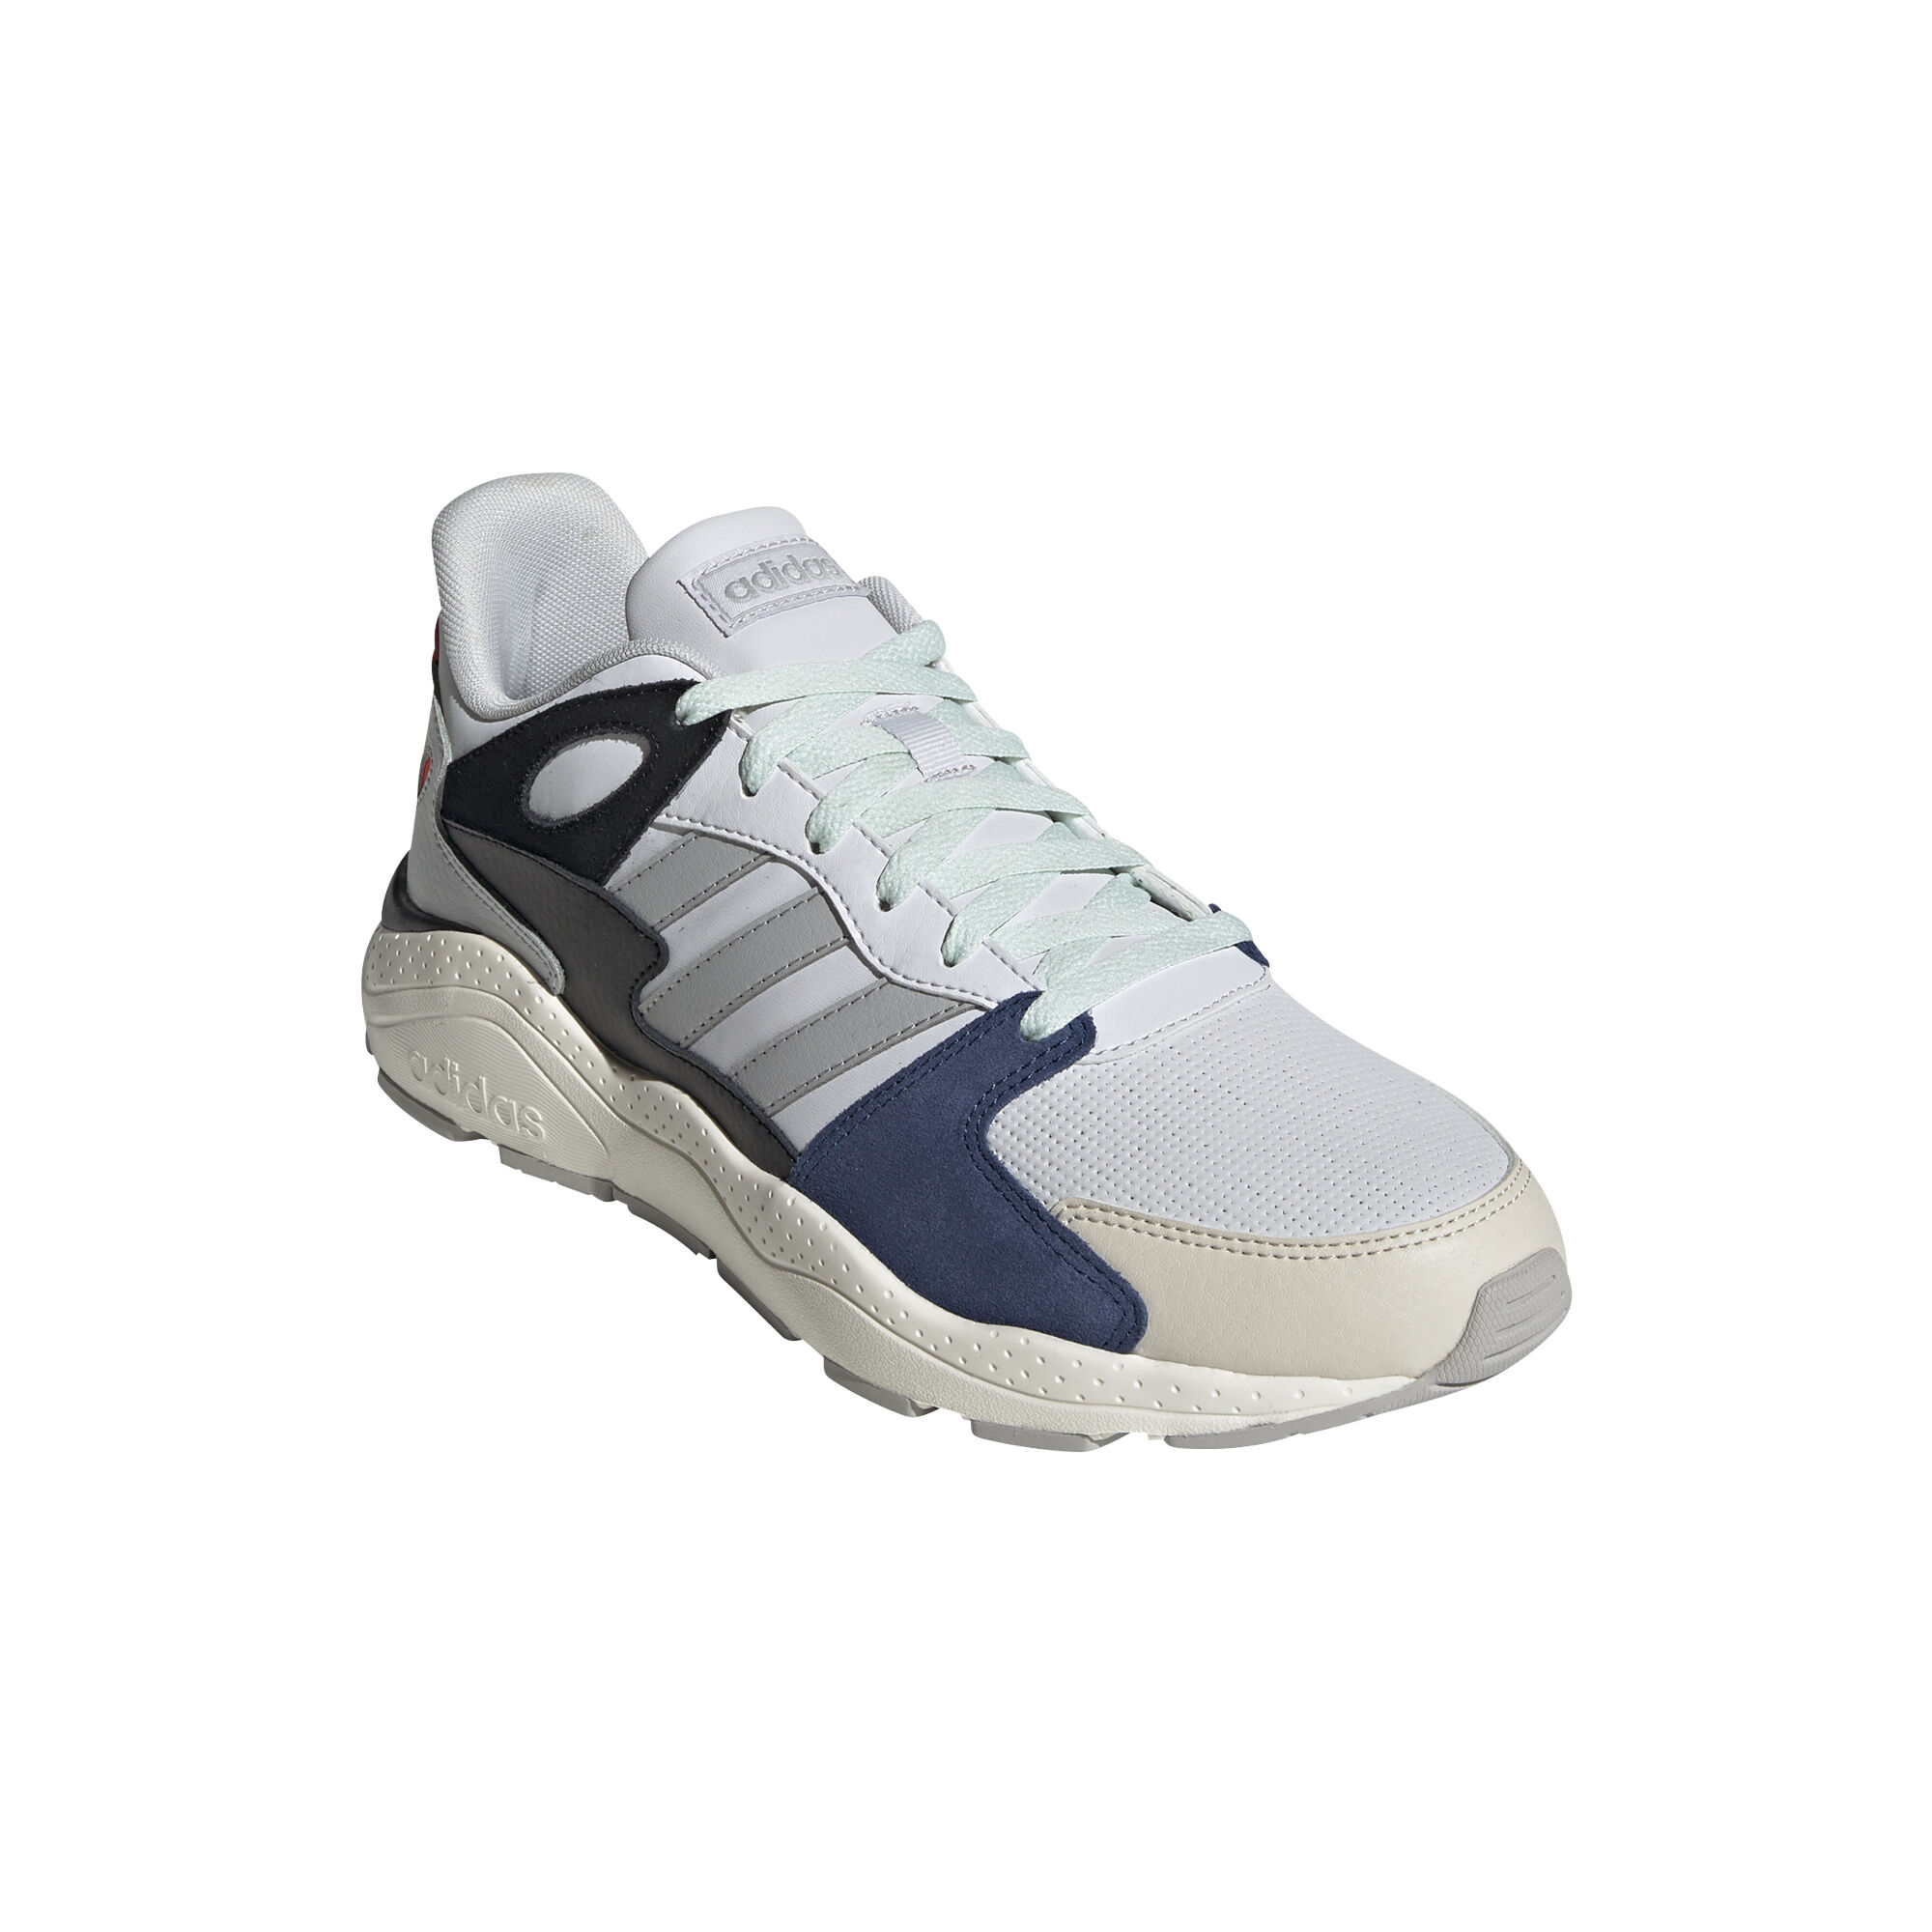 adidas crazychaos mens running shoes